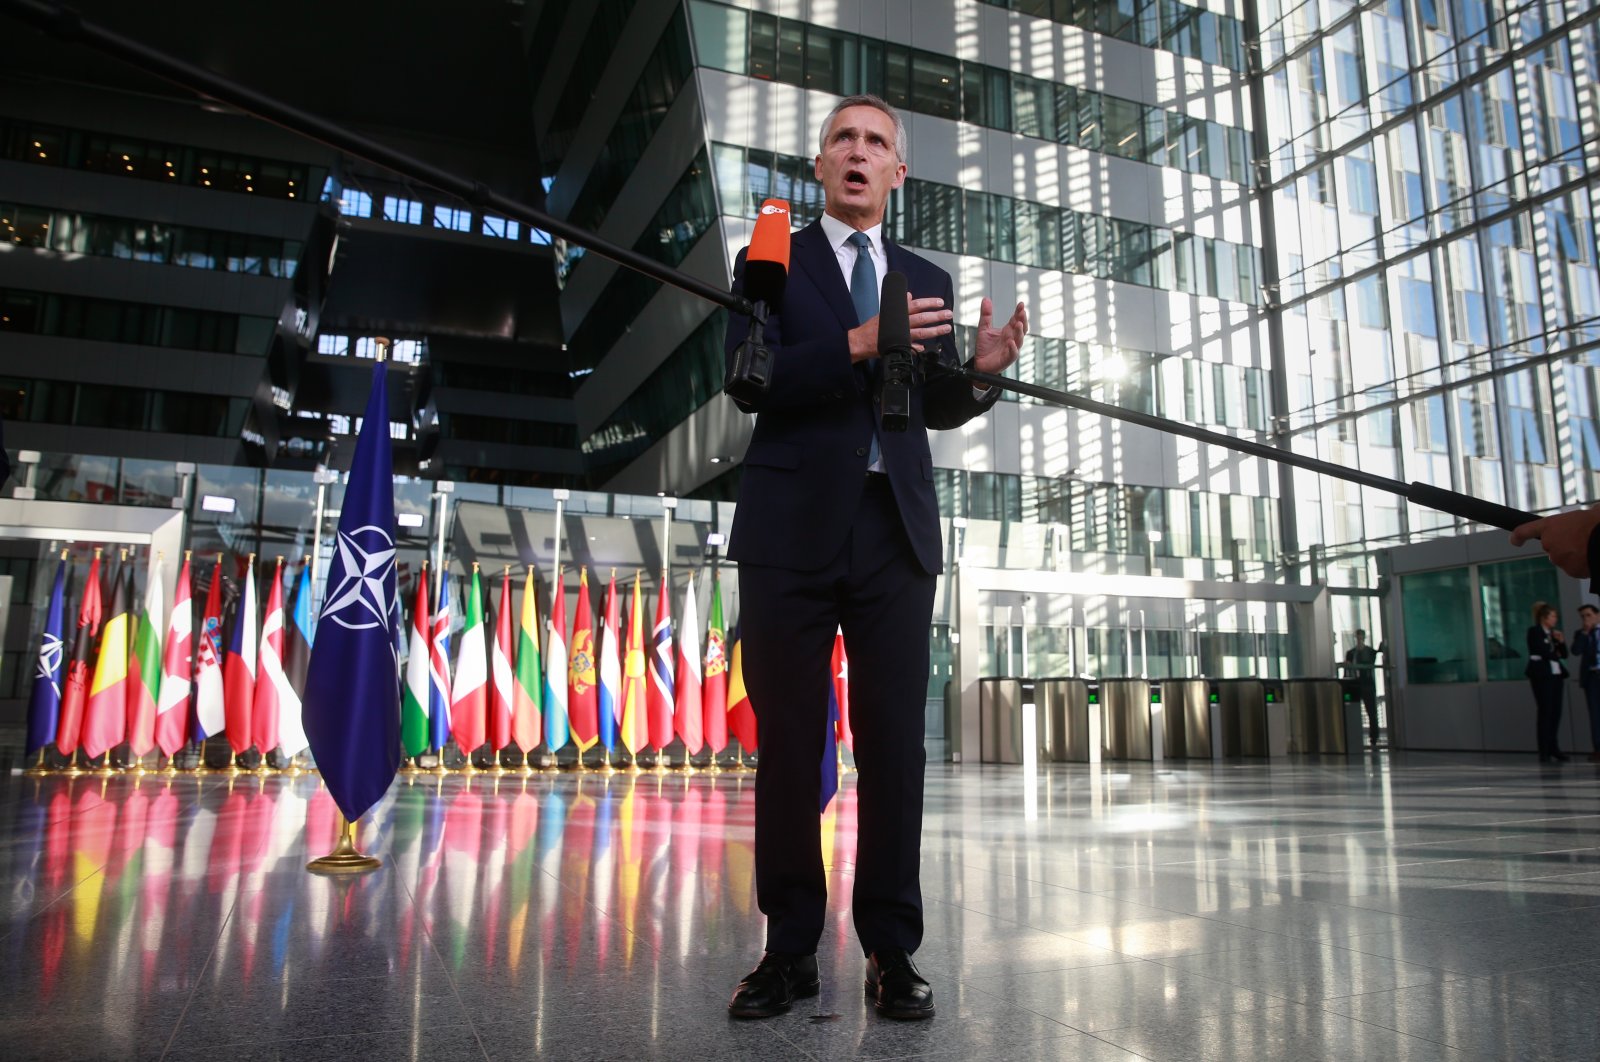 NATO Secretary-General Jens Stoltenberg during a doorstep statement ahead of a meeting of the NATO ministers of defense at the NATO headquarters in Brussels, Belgium, Oct. 21, 2021. (EPA Photo)